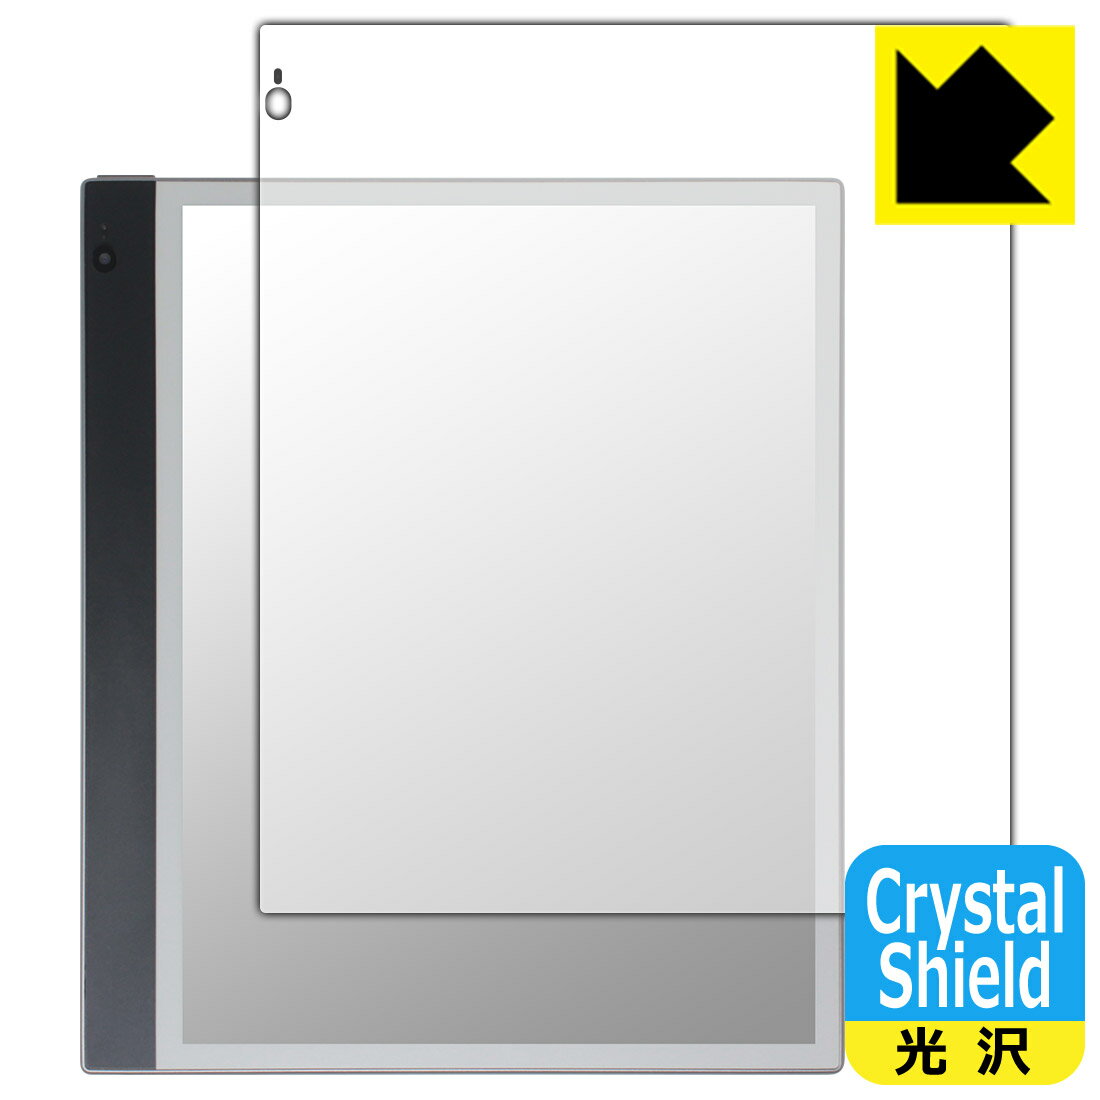 Crystal Shield【光沢】保護フィルム Bigme inkNote Color (10.3インチ) 画面用 (3枚セット) 日本製 自社製造直販